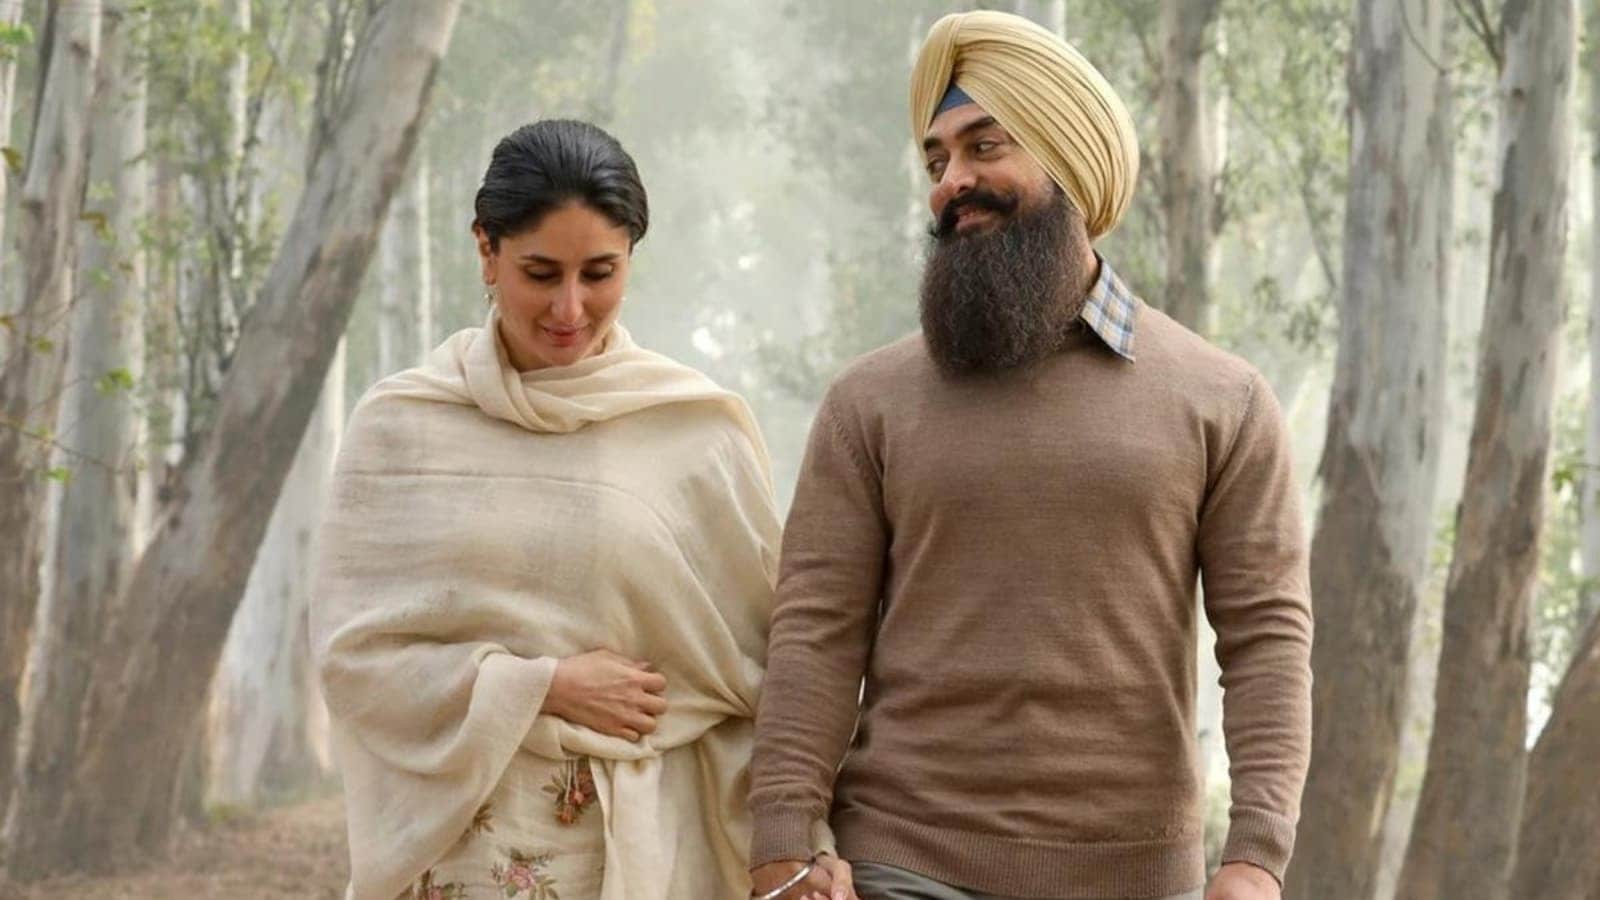 Laal Singh Chaddha silently lands on Netflix 8 weeks after theatrical release; Aamir Khan had said they’d wait 6 months